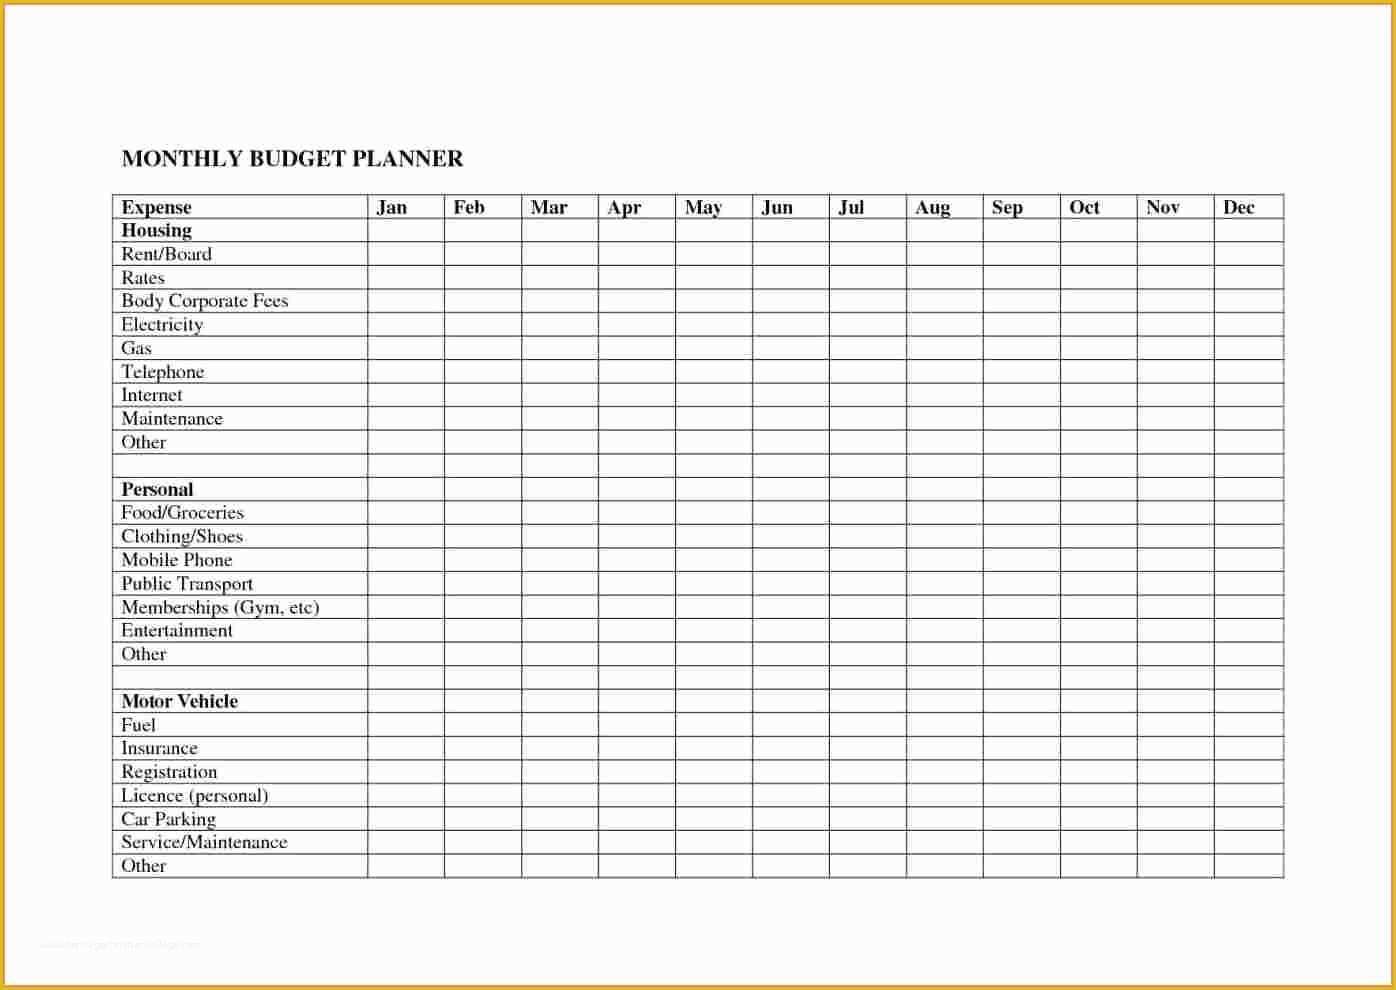 Free Online Budget Planner Template Of 10 Monthly Bud Planner Spreadsheet